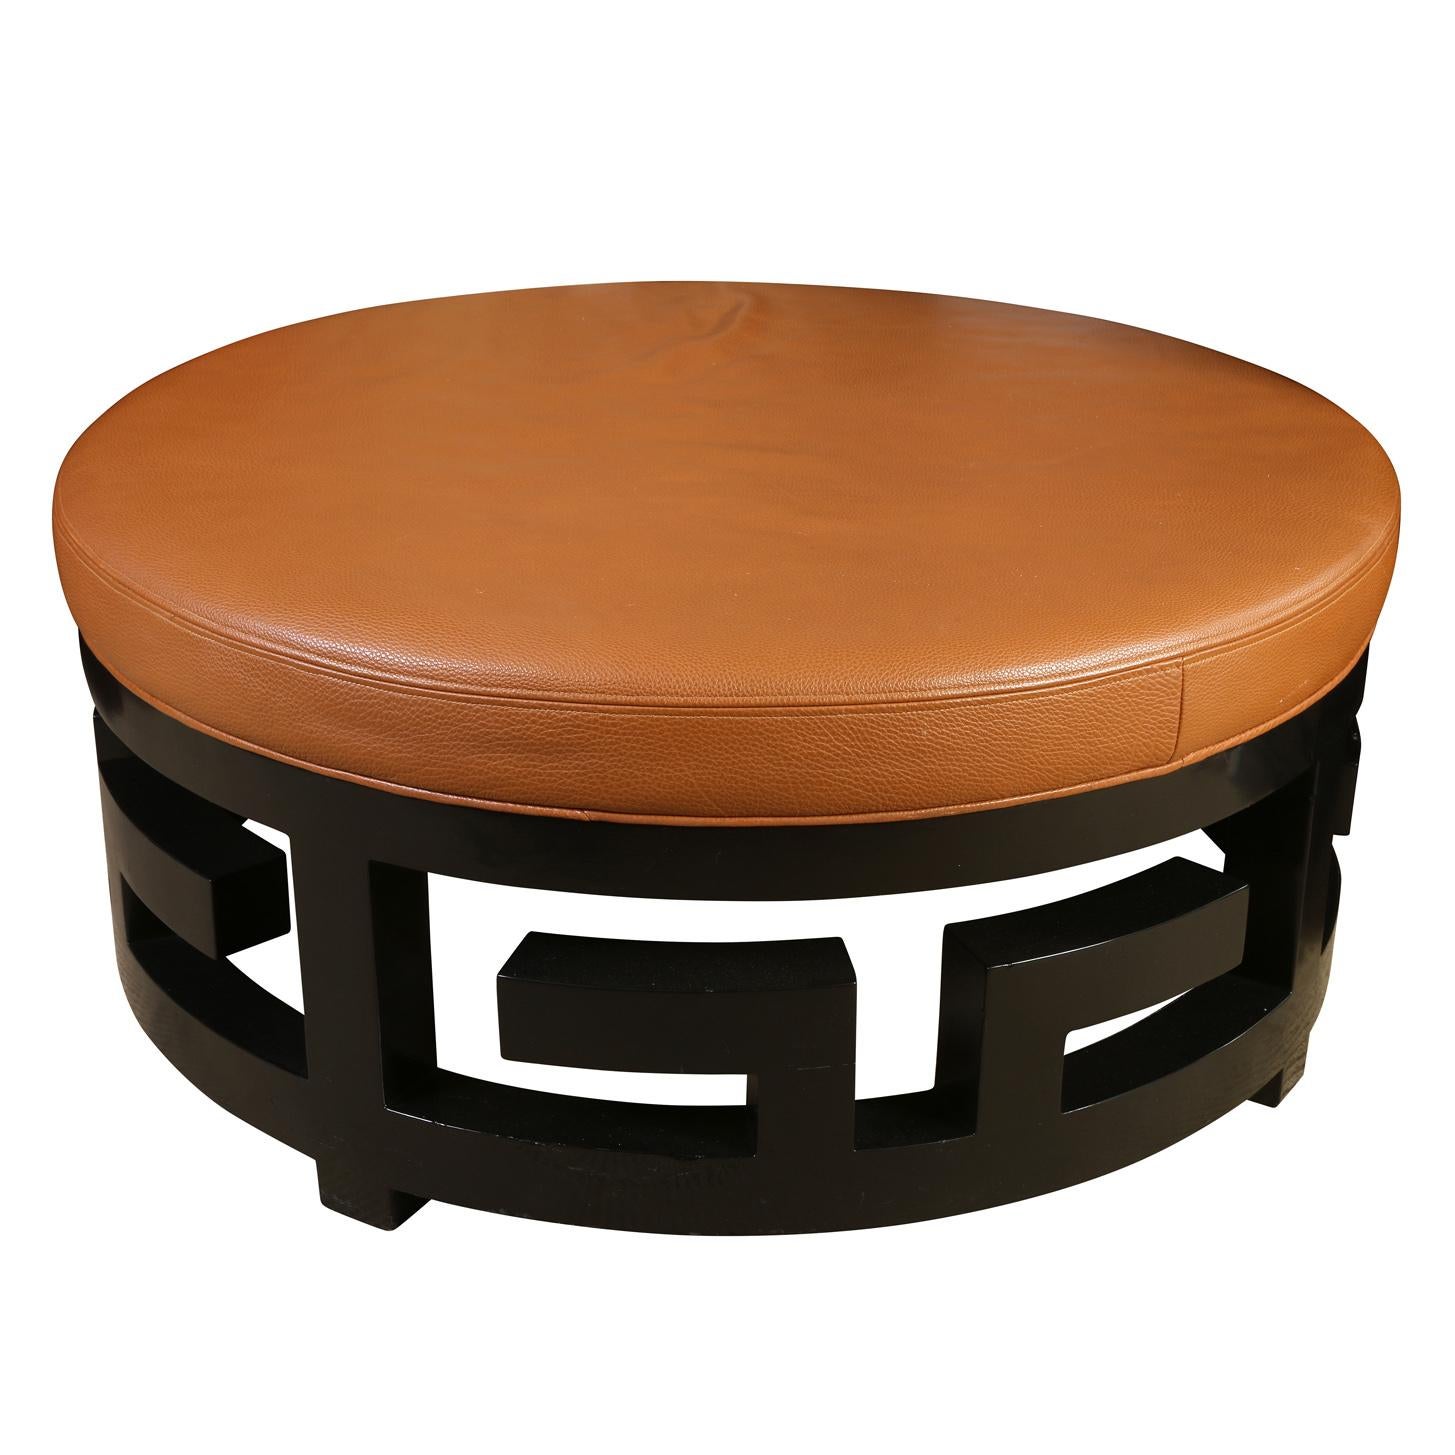 Round Pebbled Leather Ottoman with Black Fretwork Base In Good Condition For Sale In Locust Valley, NY